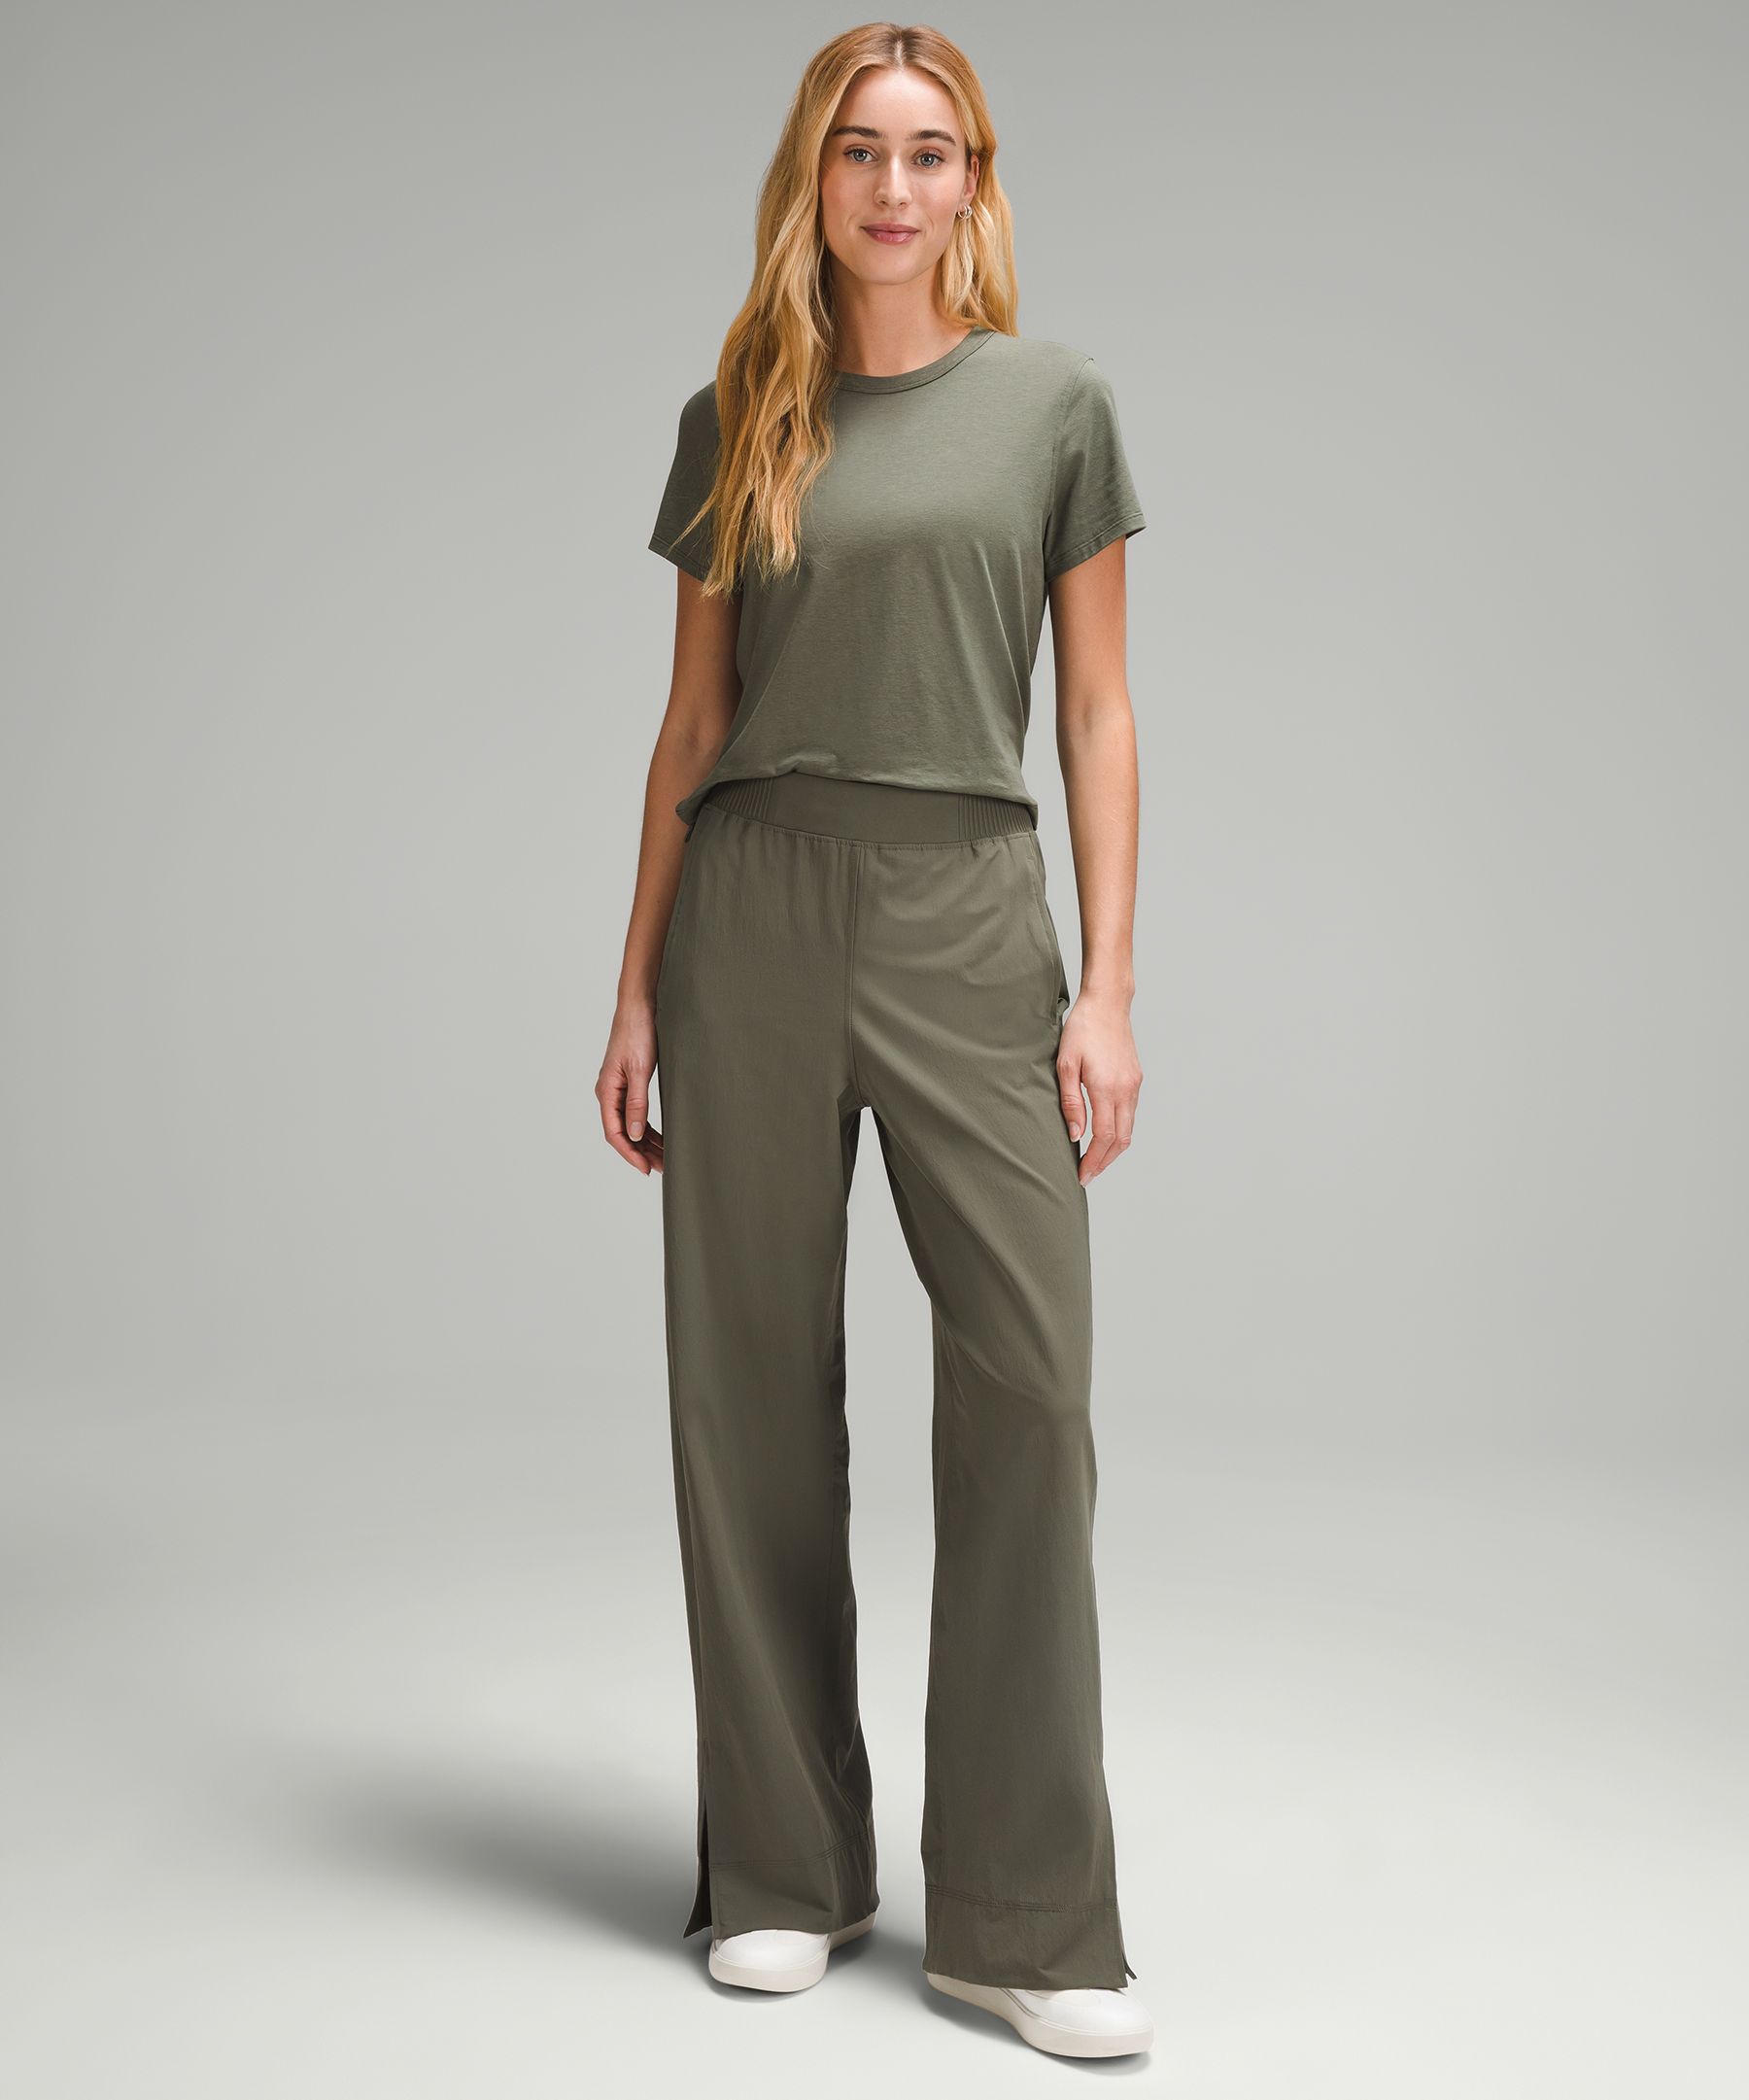 Lululemon athletica Stretch Woven Wide-Leg High-Rise Cropped Pant